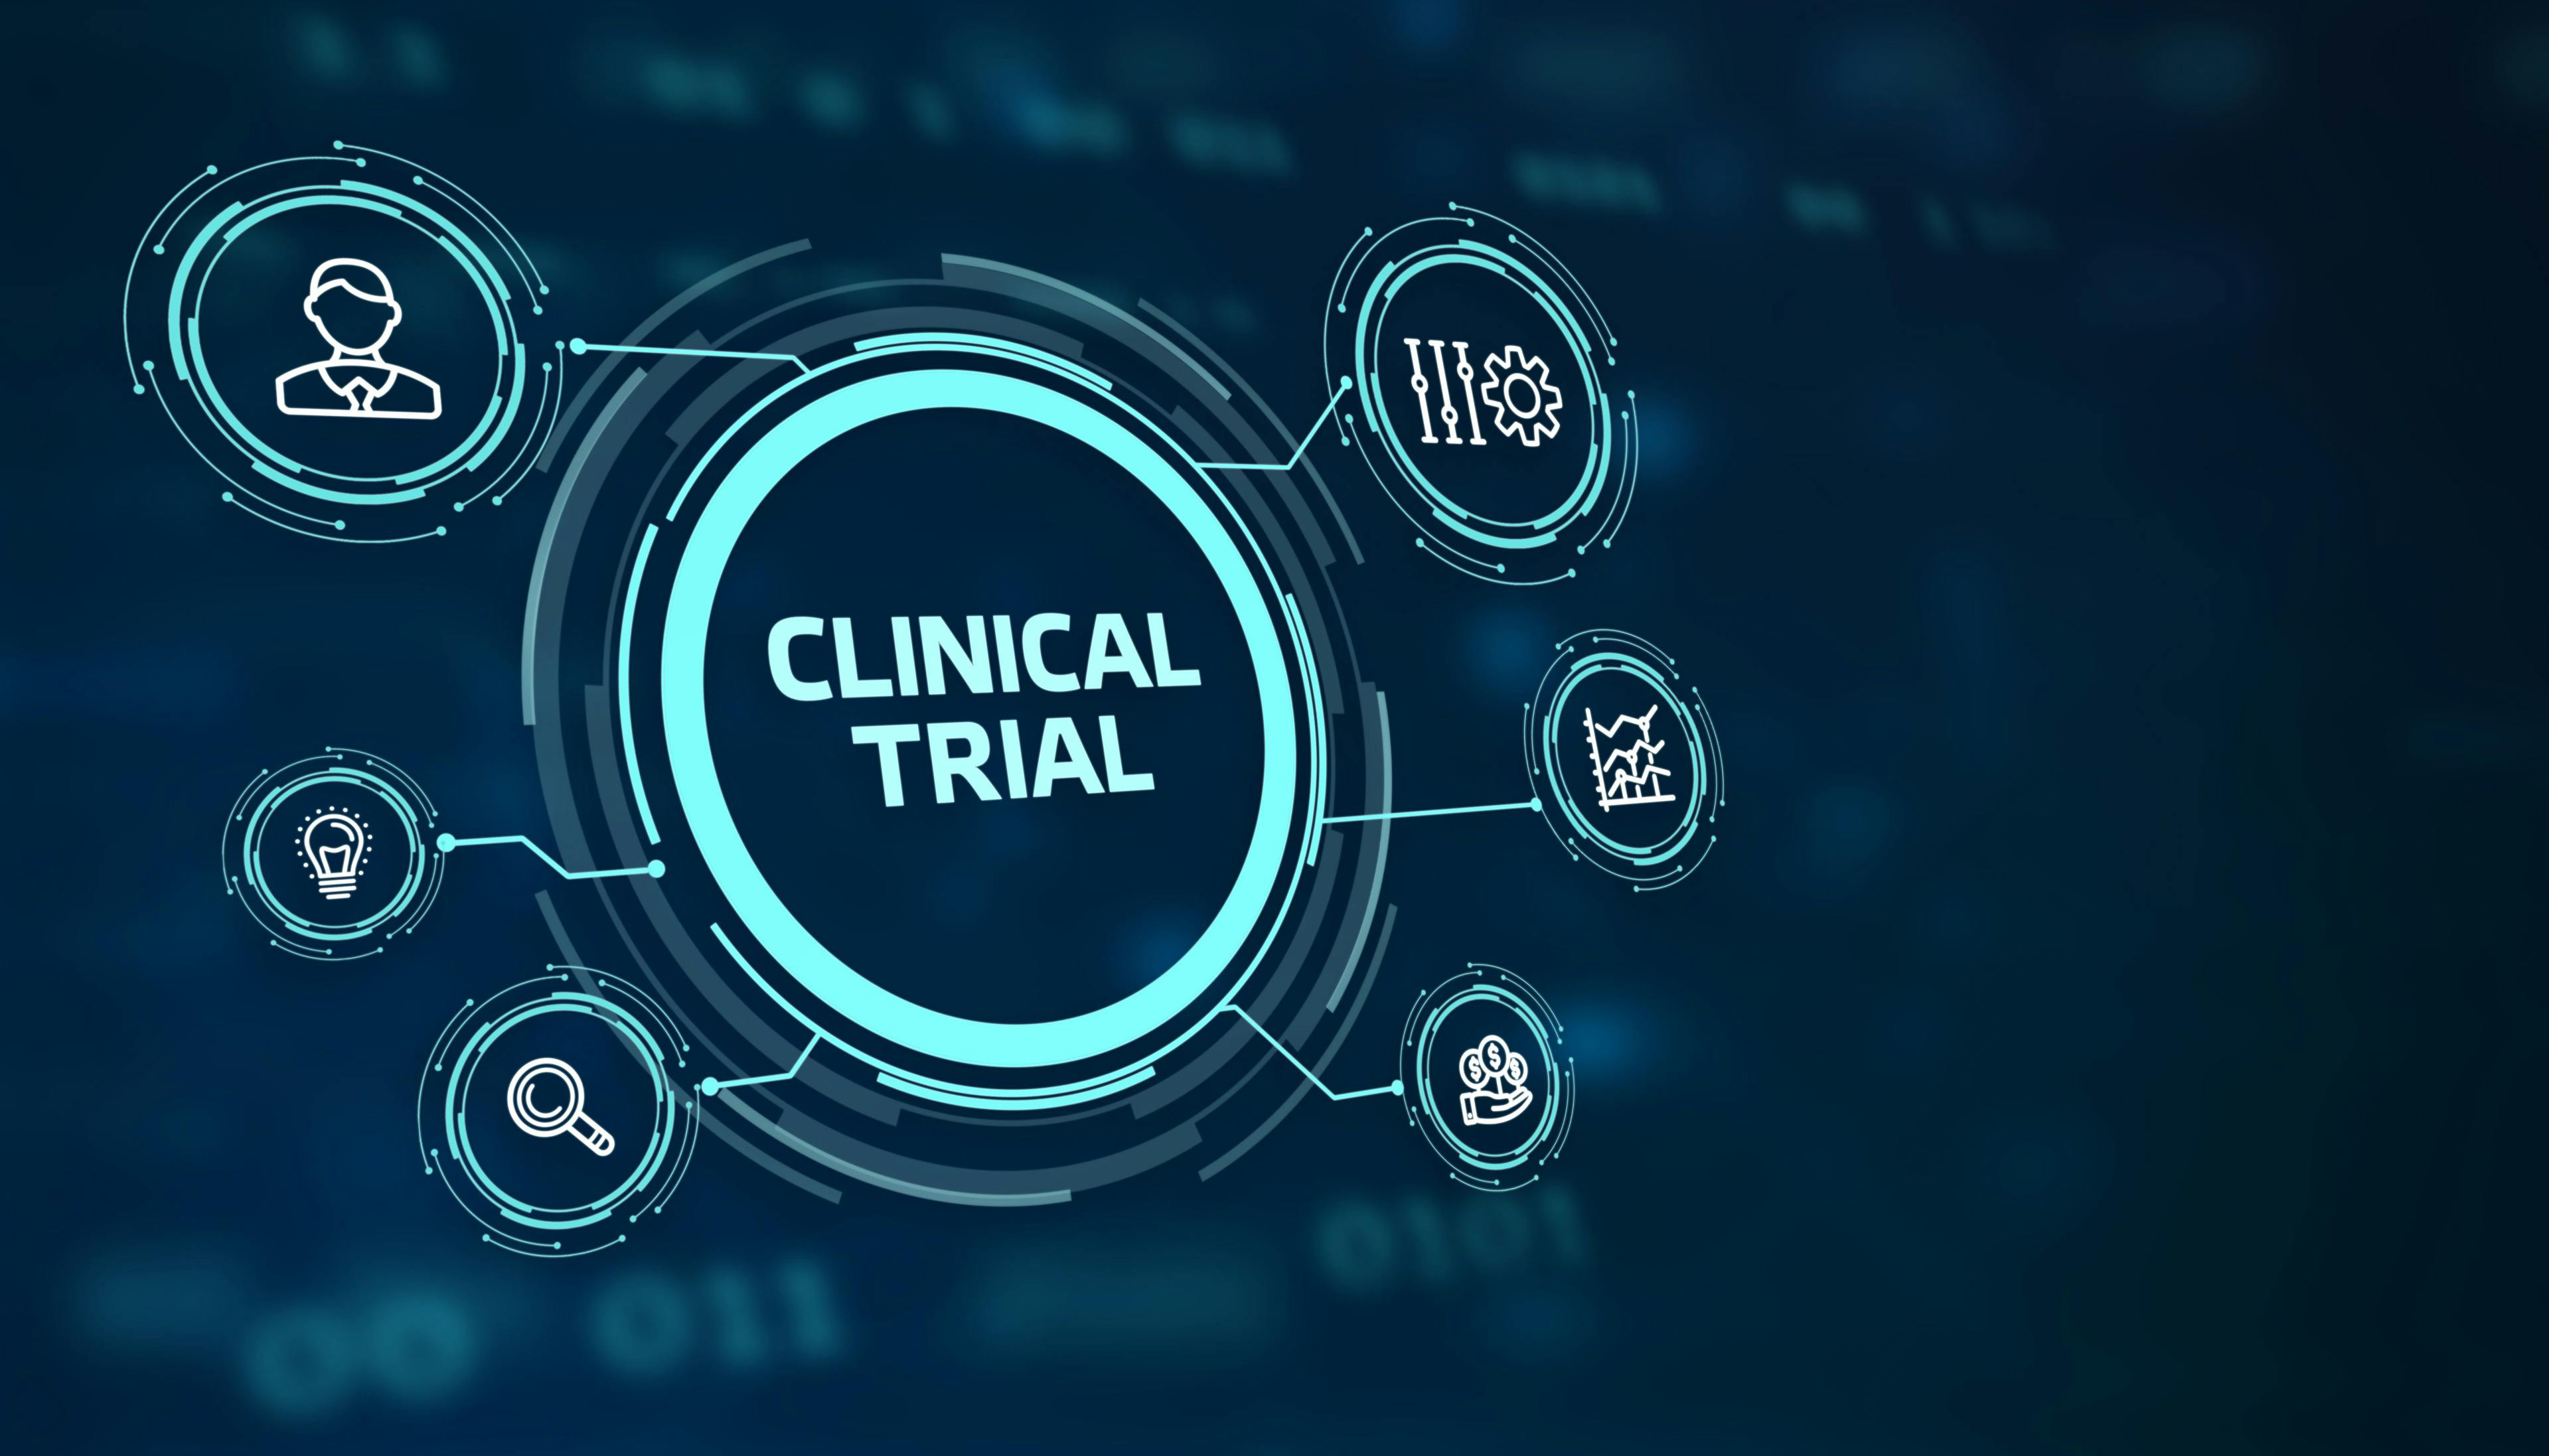 Clinical trial | Image credit: photon_photo - stock.adobe.com